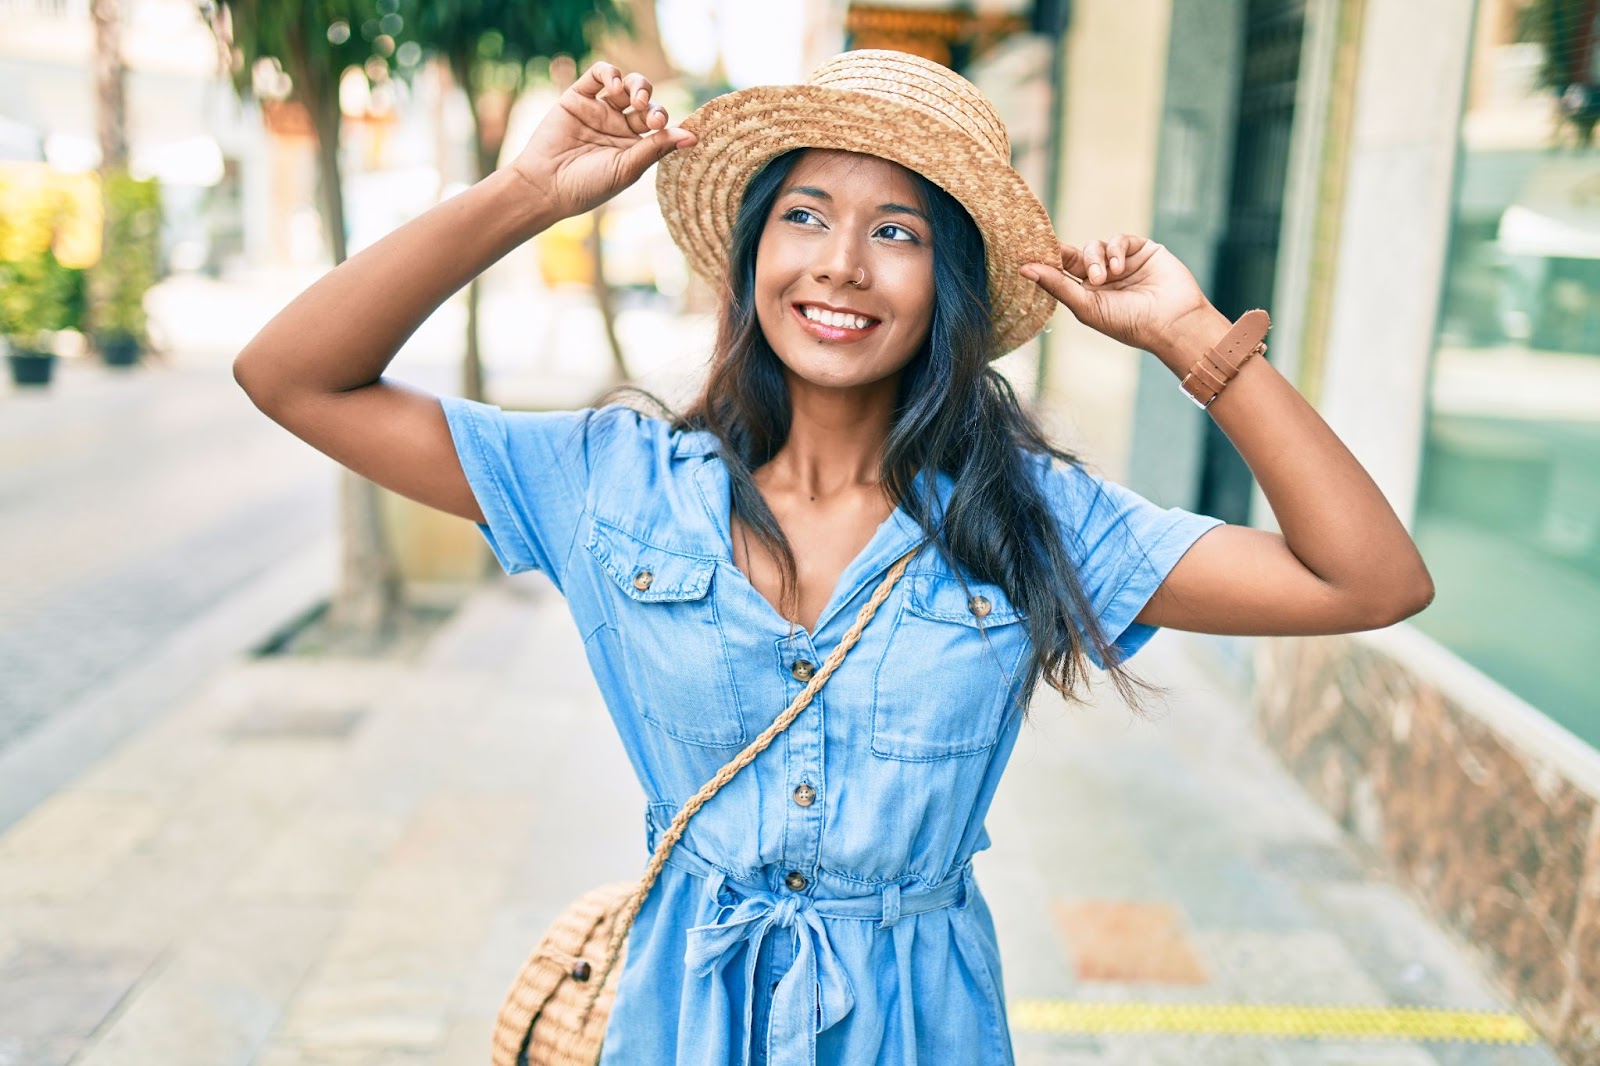 Young woman in a blue shirt dress wearing a summer hat while smiling in the city.